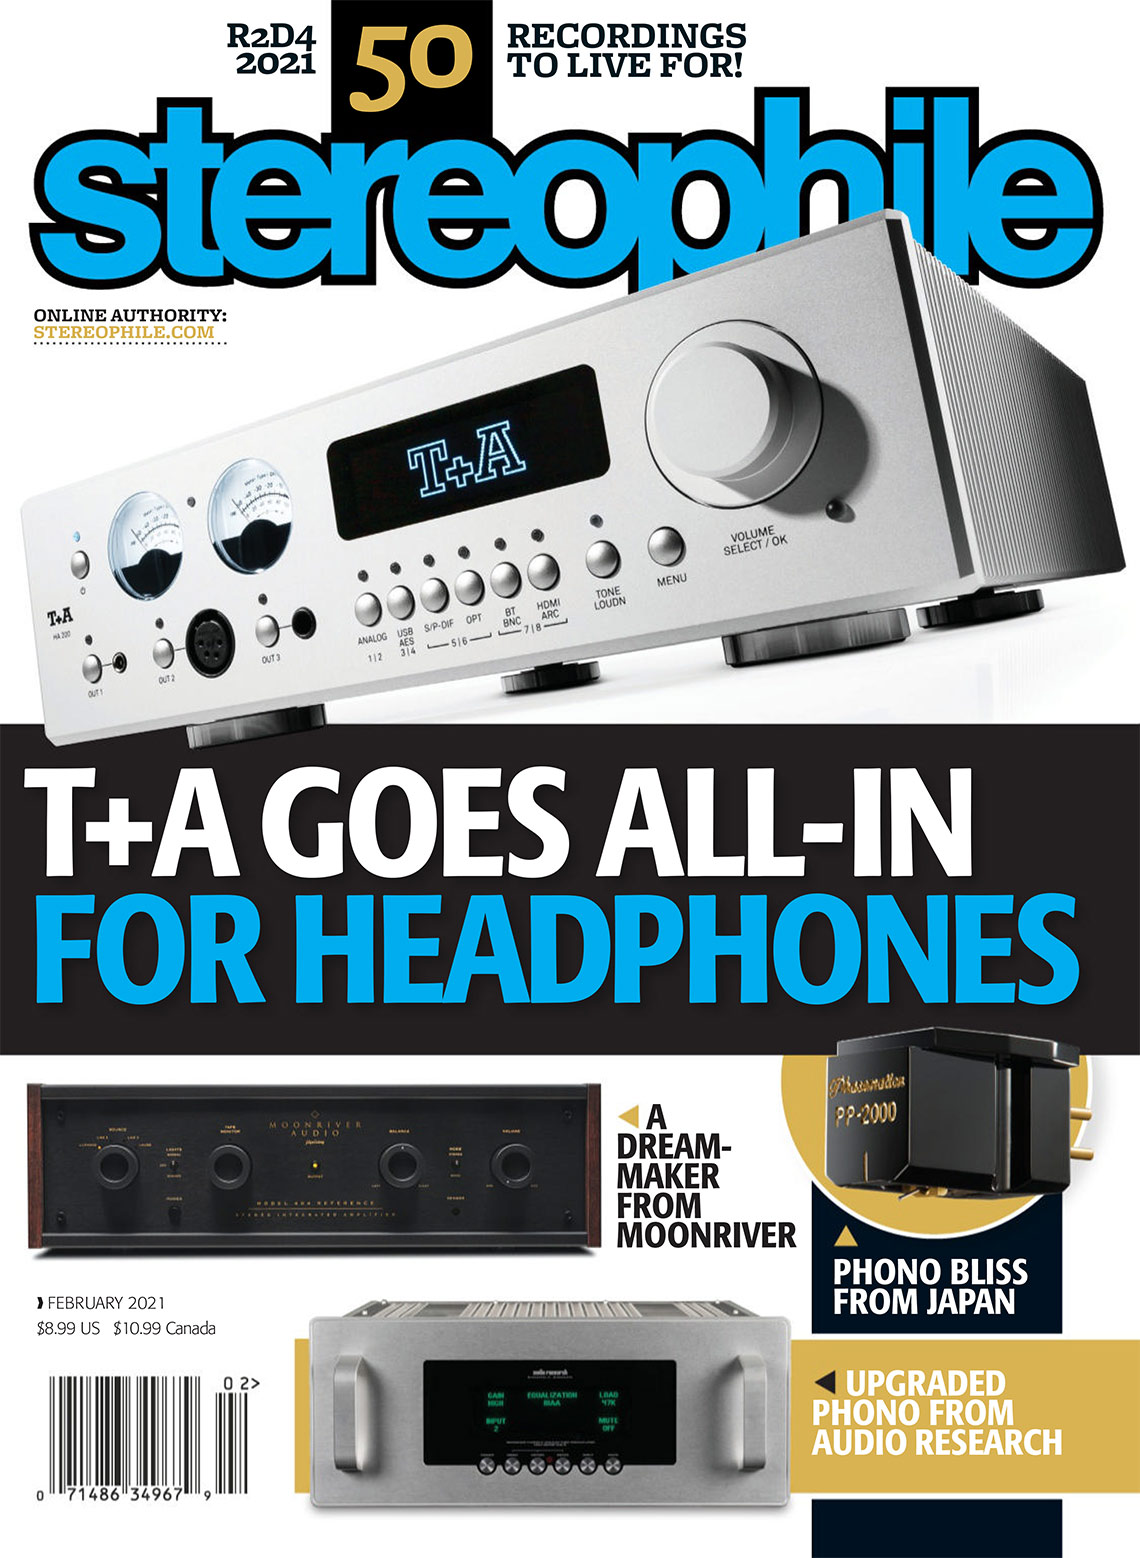 Moonriver 404 Reference Stereophile February 2021 1